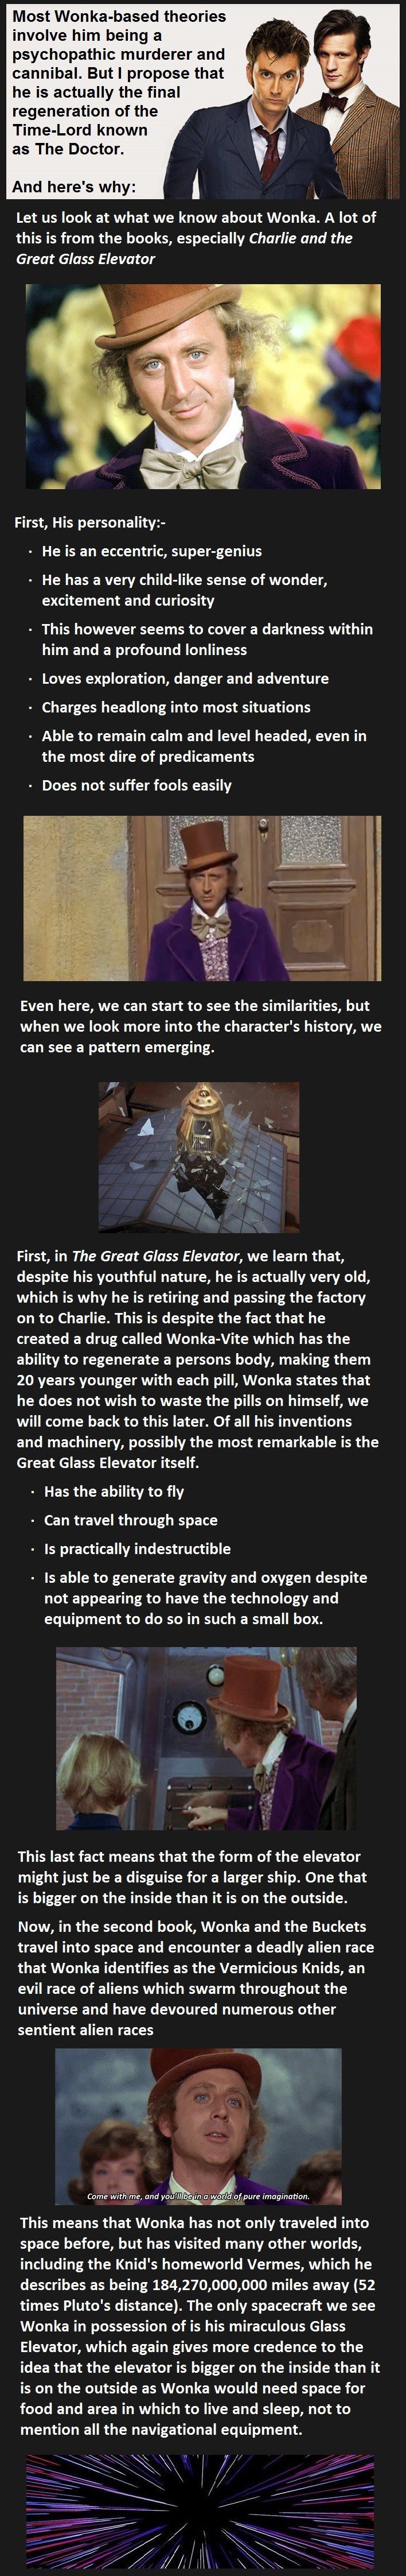 Willy Wonka Doctor Who Fan Theory